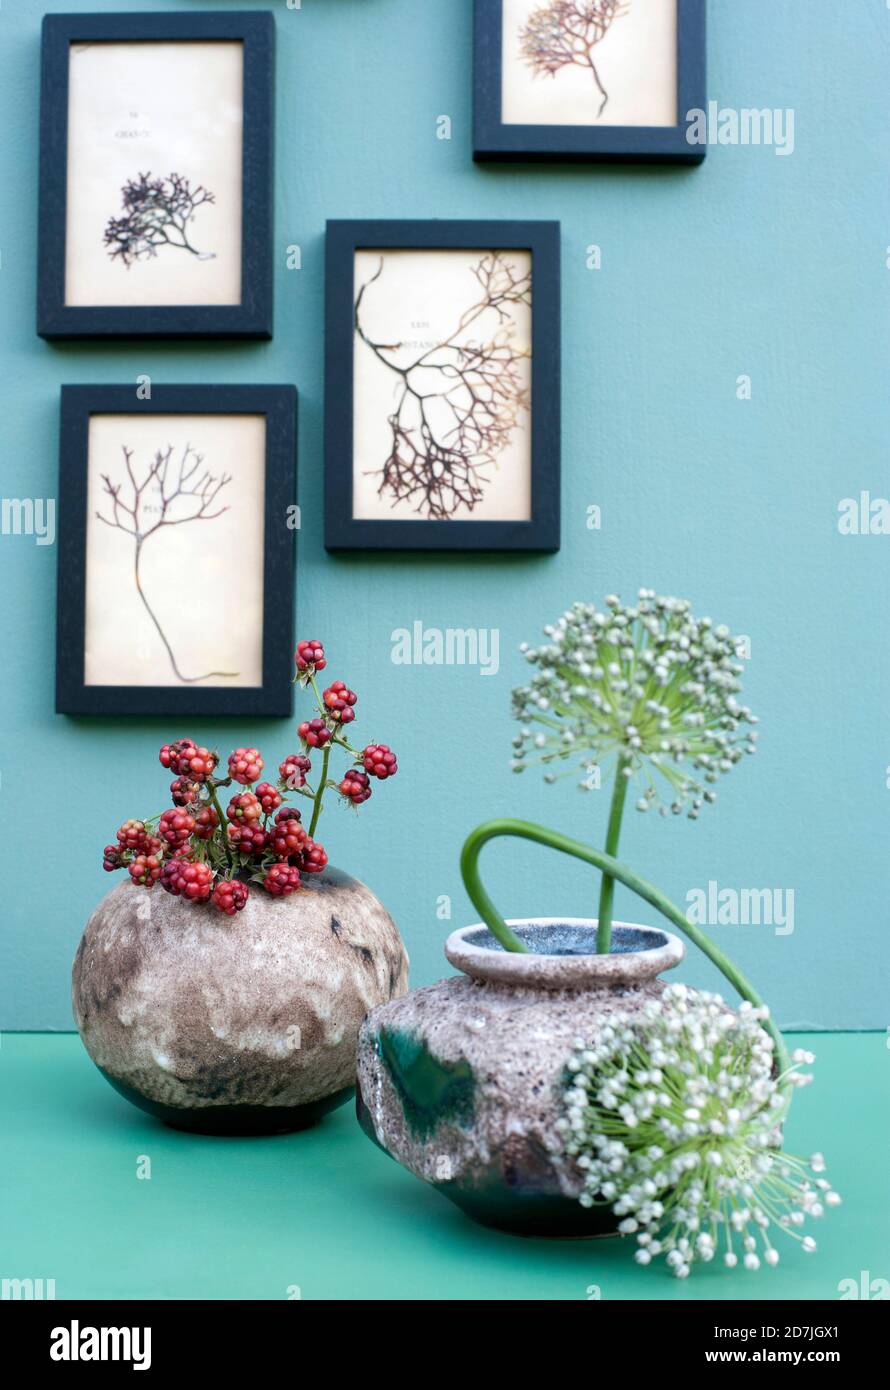 Frames with dried seaweeds hanging over vases with blackberries and allium flowers Stock Photo